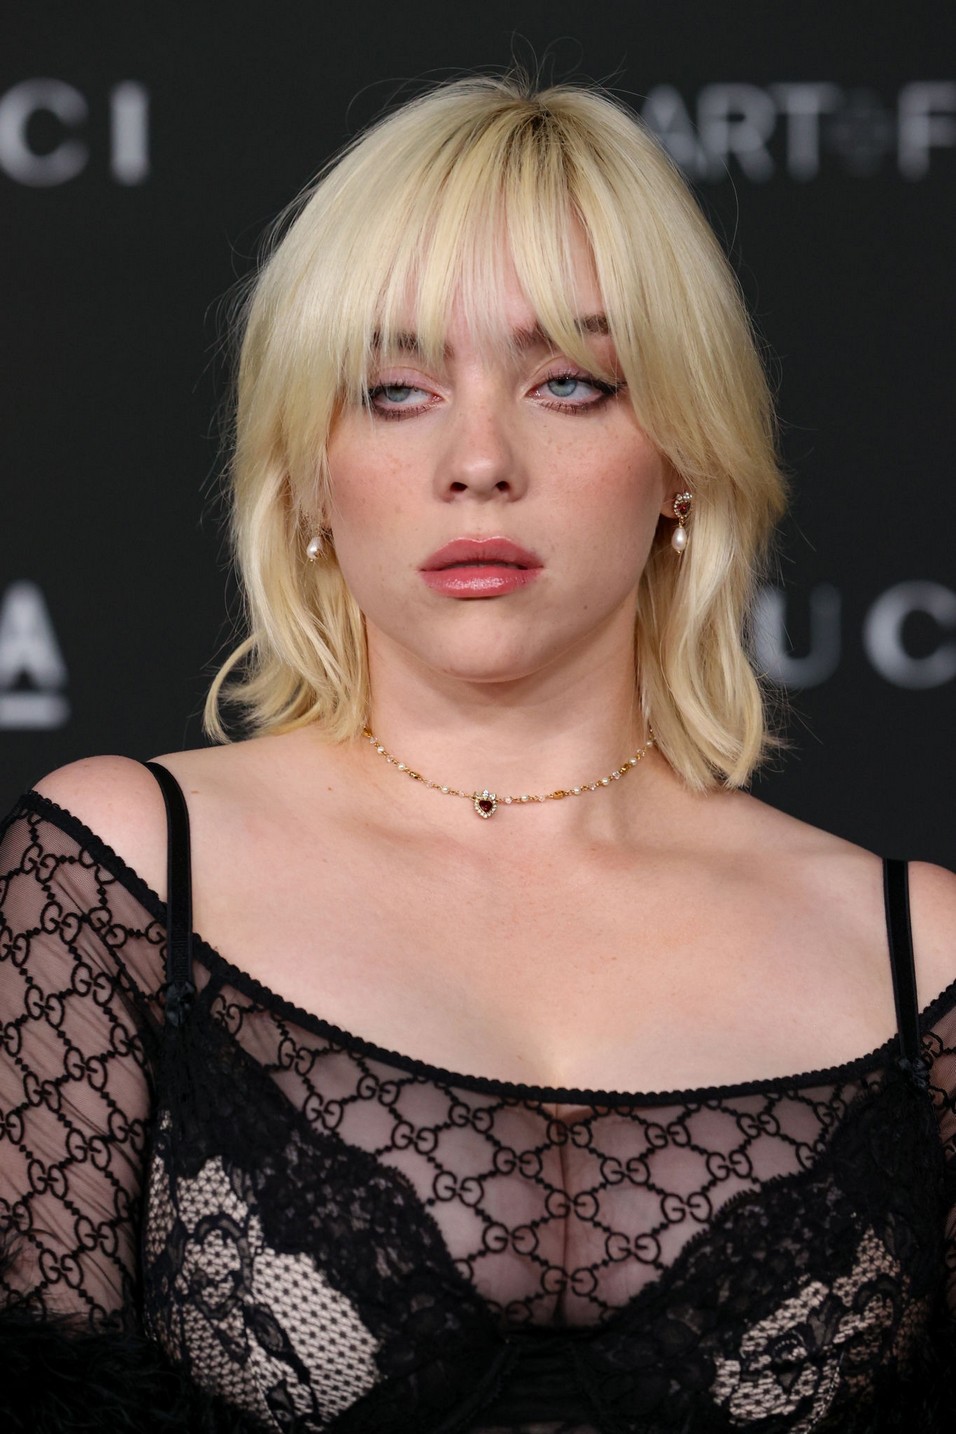 Billie Eilish Showed Her Tits For The First Time TheFappening.Pro 12 - Billie Eilish Hot In A Revealing Outfit (13 Photos)